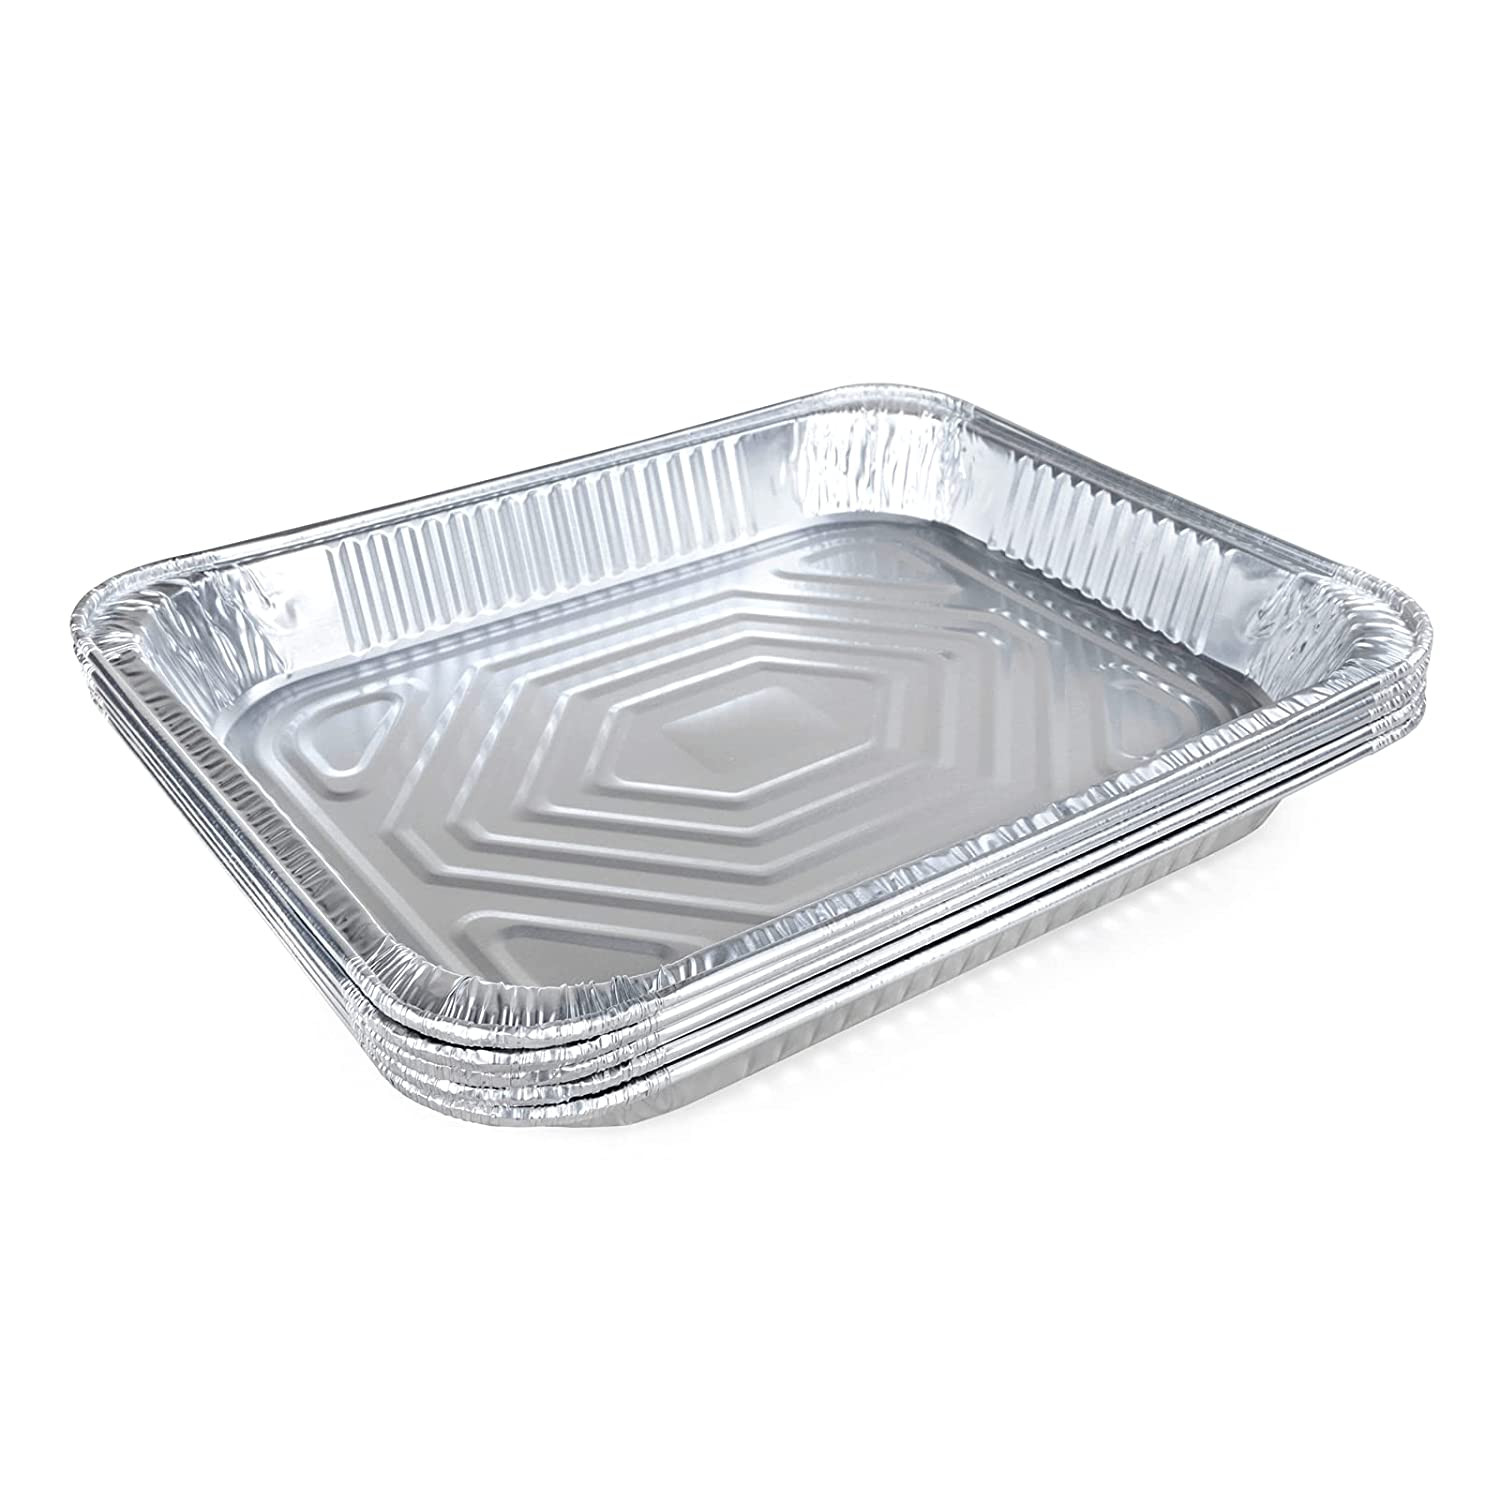 https://idlpack.com/image/cache/catalog/Products/Foil%20Pans%20and%20Trays/half%20shallow-1500x1500.jpg